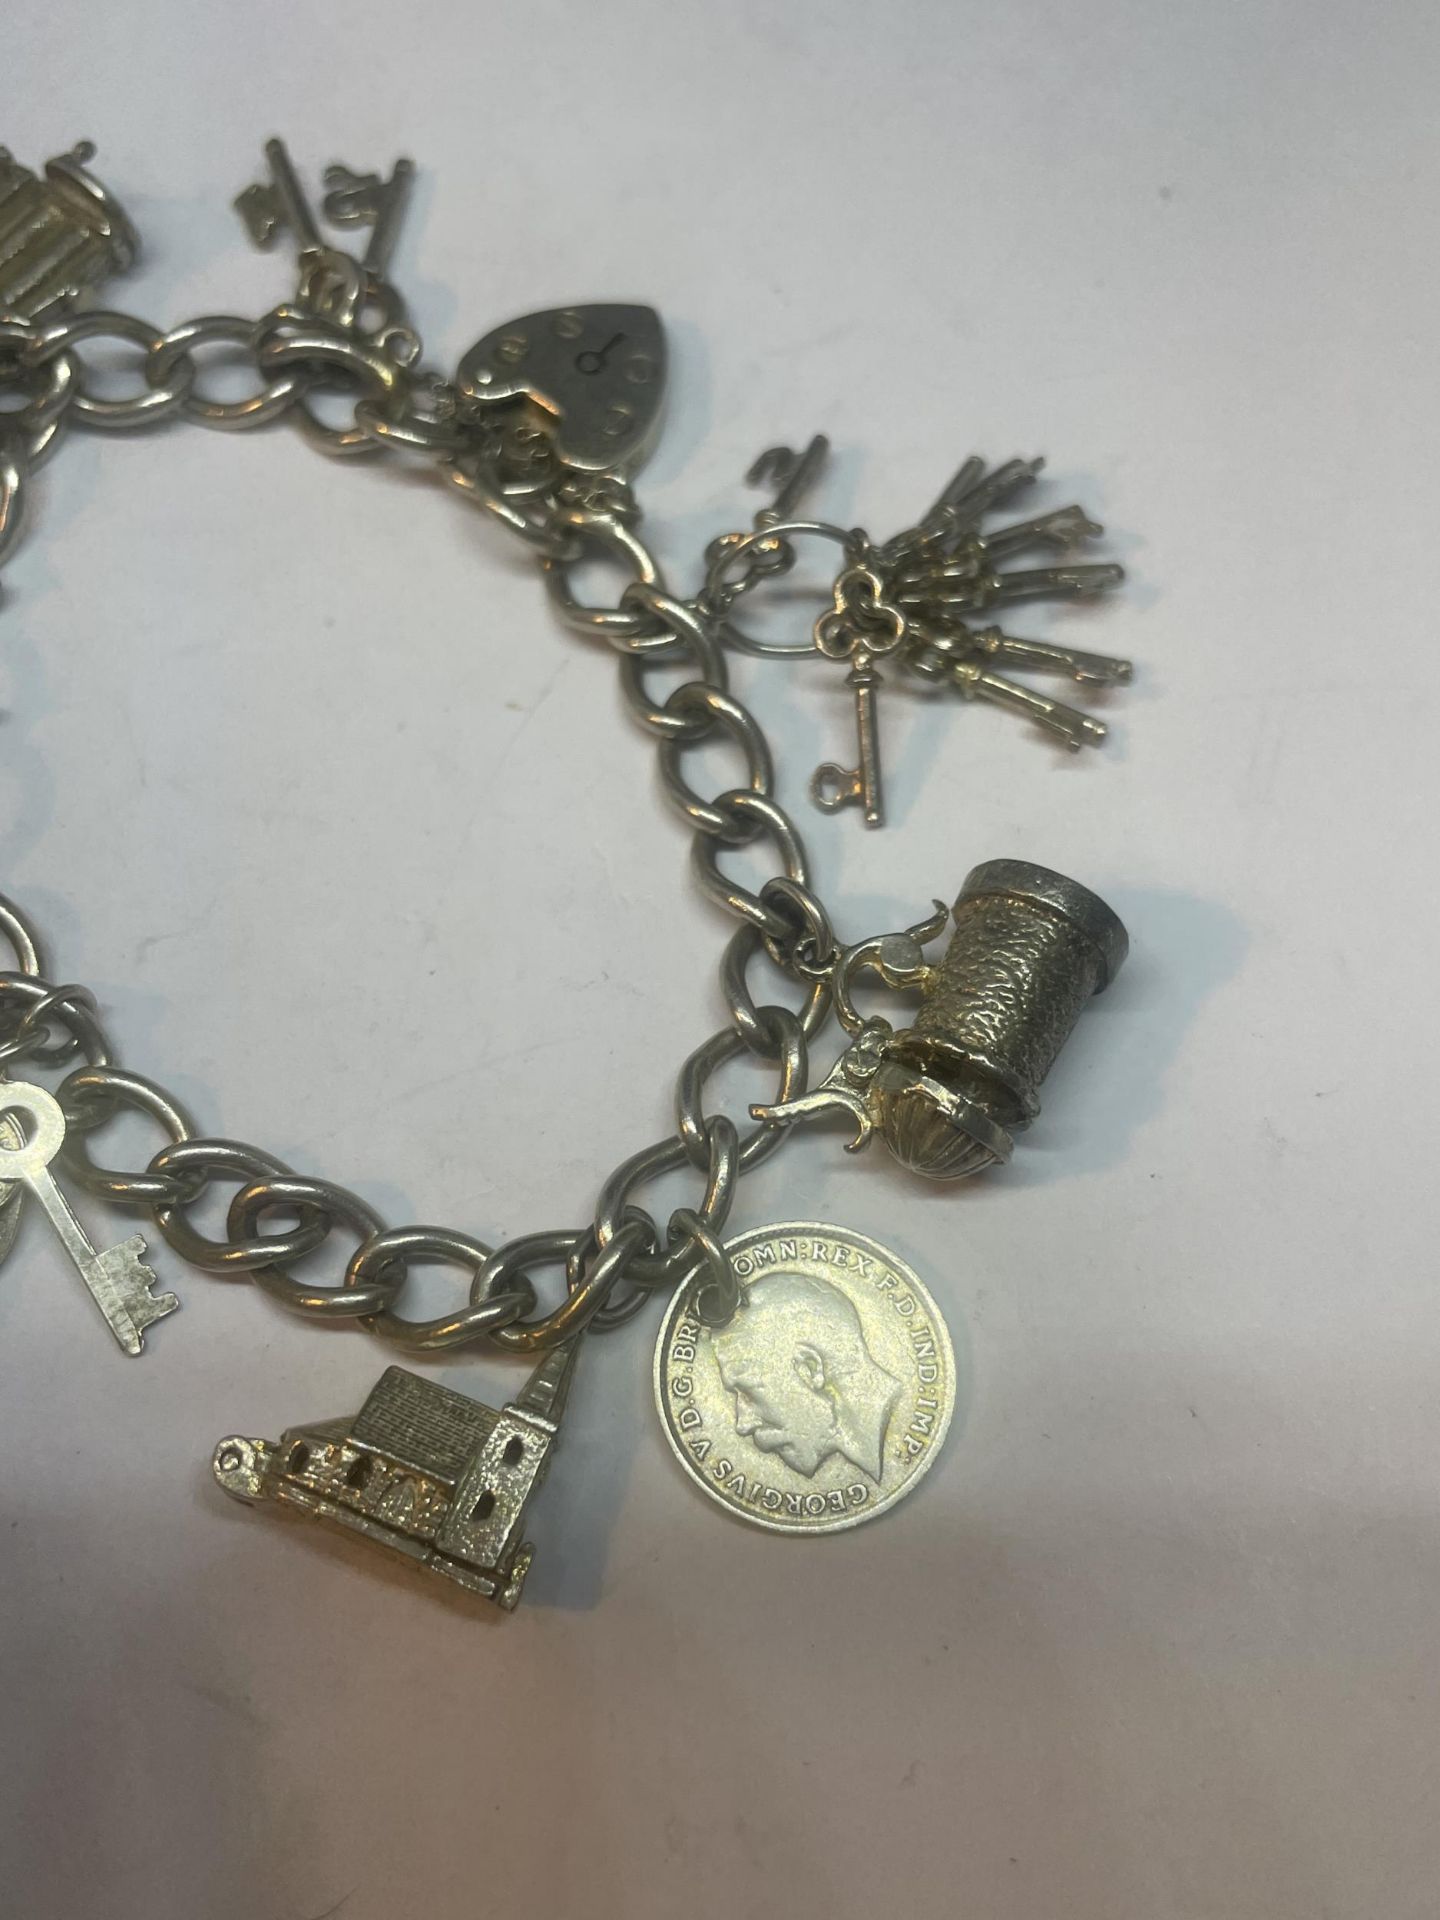 A SILVER CHARM BRACELET WITH ELEVEN CHARMS AND A HEART PADLOCK - Image 3 of 3